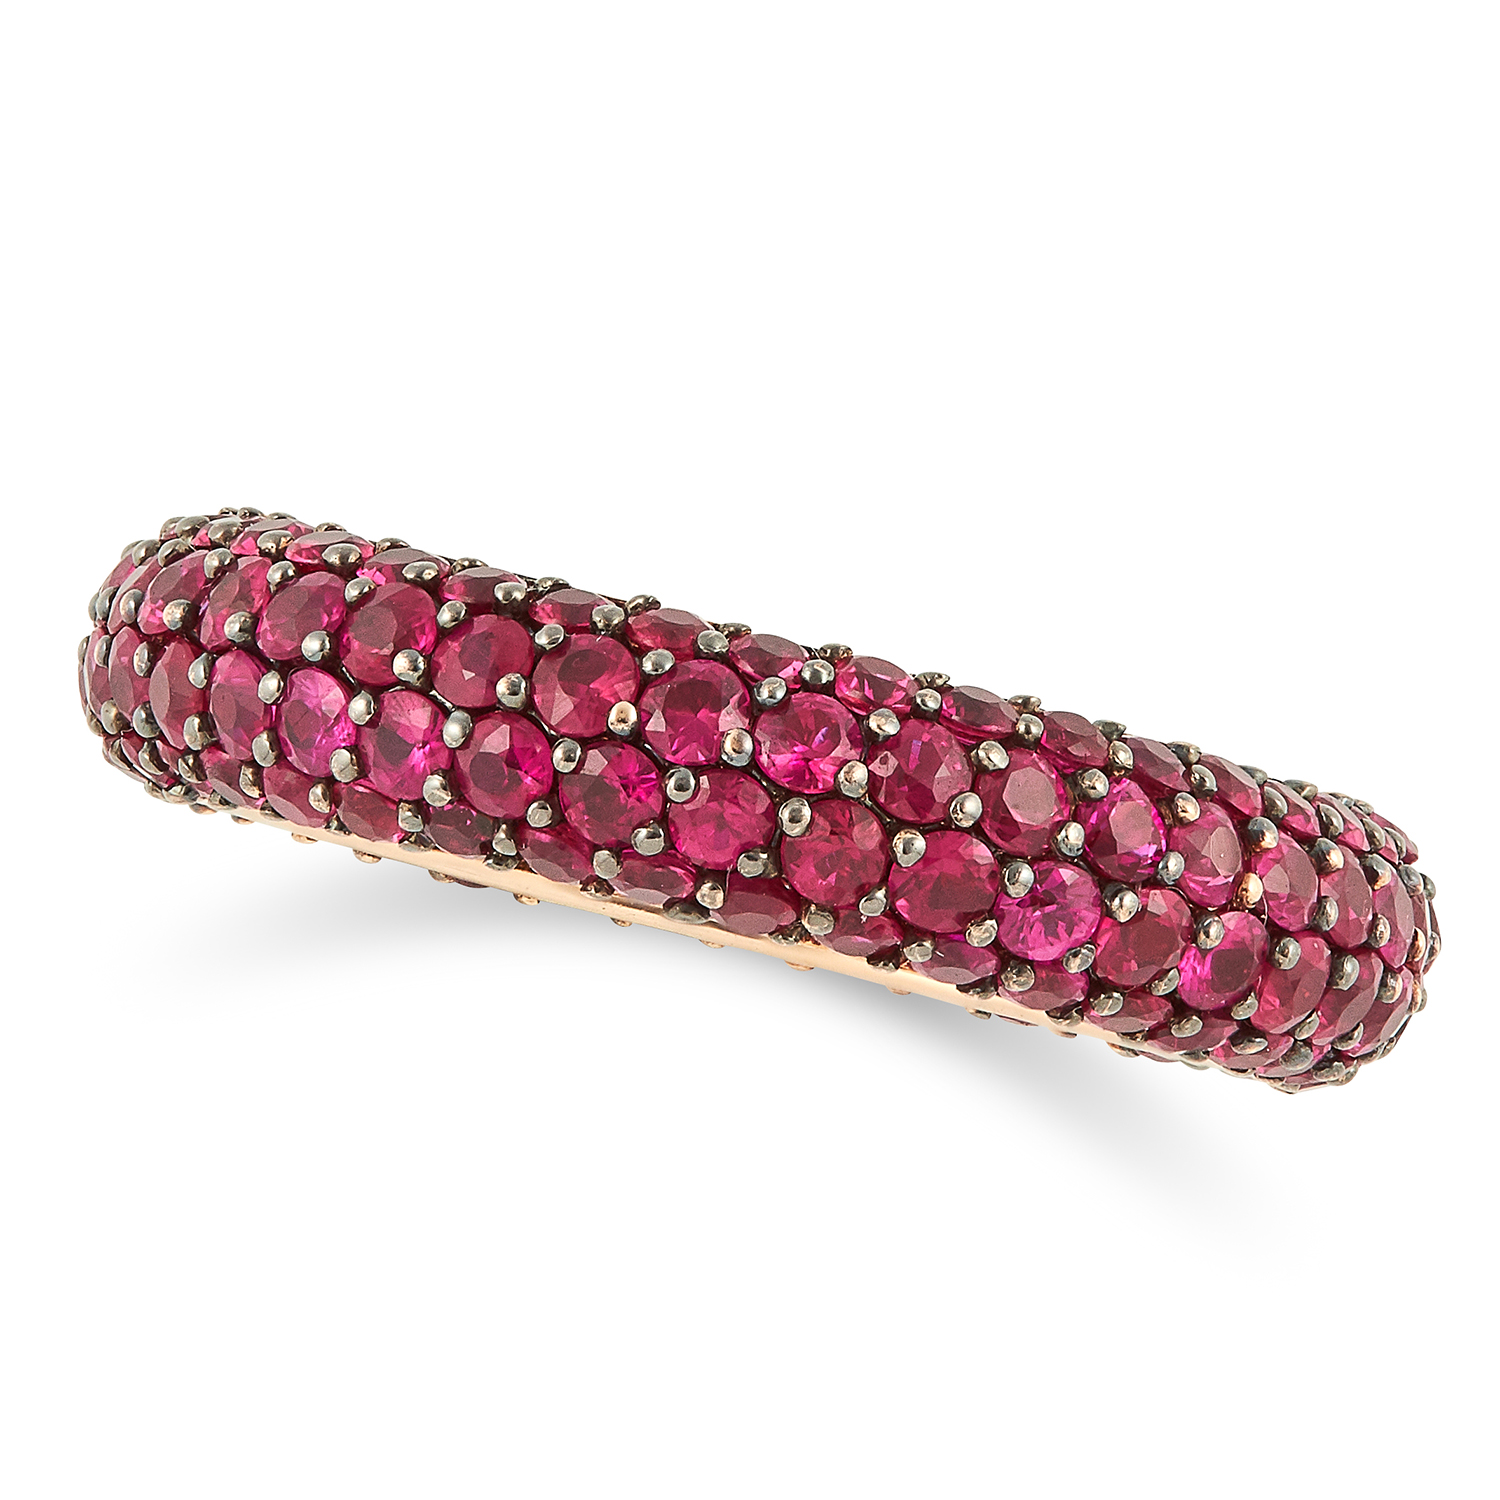 RUBY ETERNITY RING set with pave set round cut rubies, size N / 6.5, 4.4g.